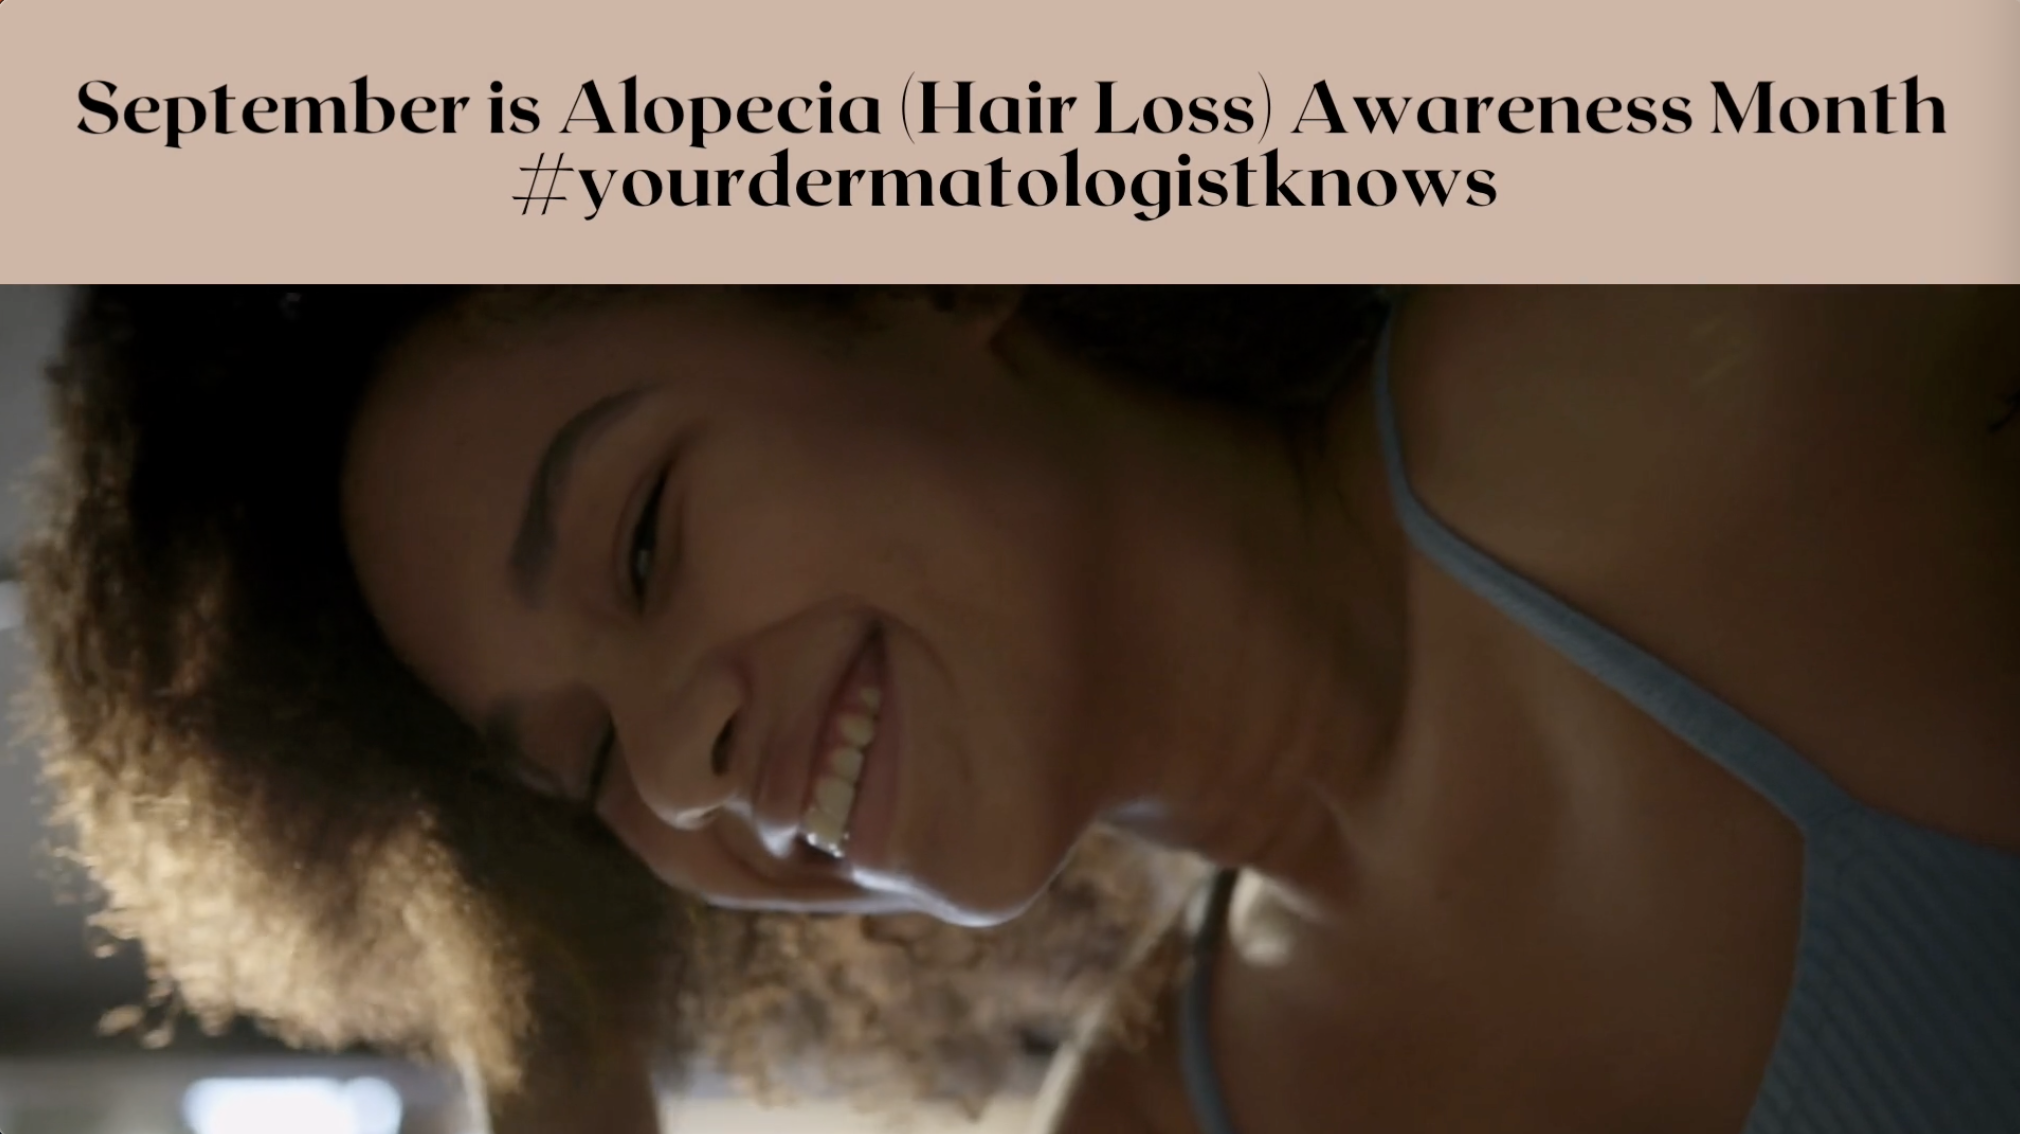 September is Alopecia (Hair Loss) Awareness Month — Let’s Talk About It!